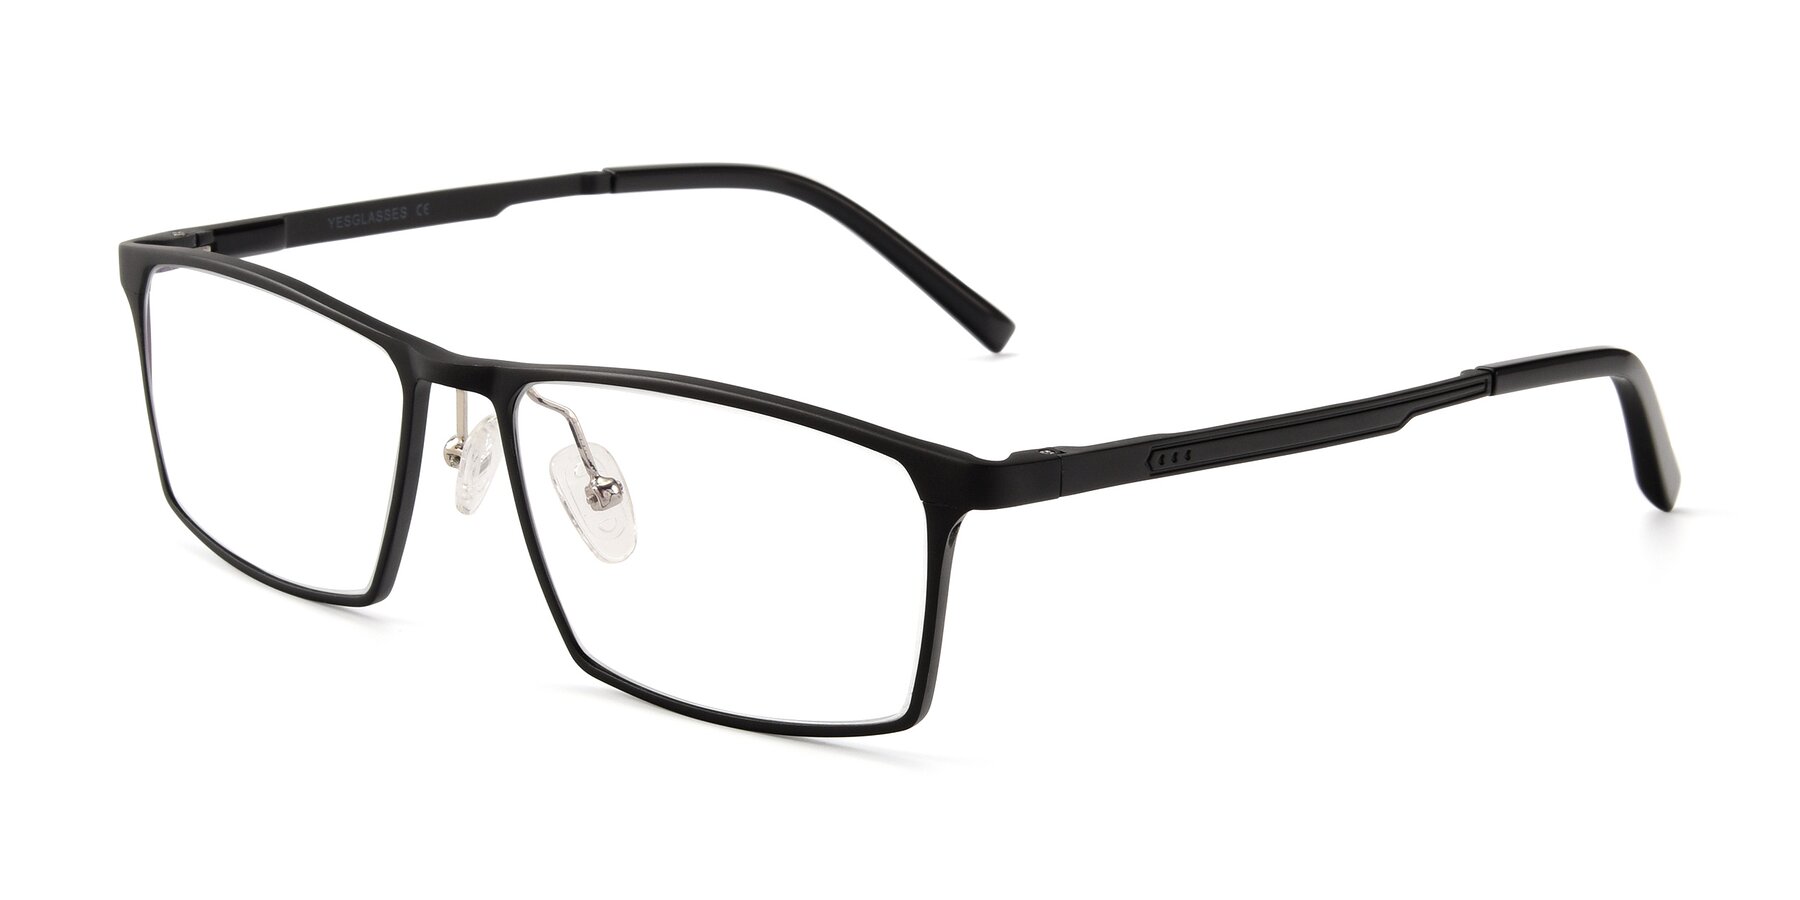 Angle of CX6341 in Black with Clear Eyeglass Lenses